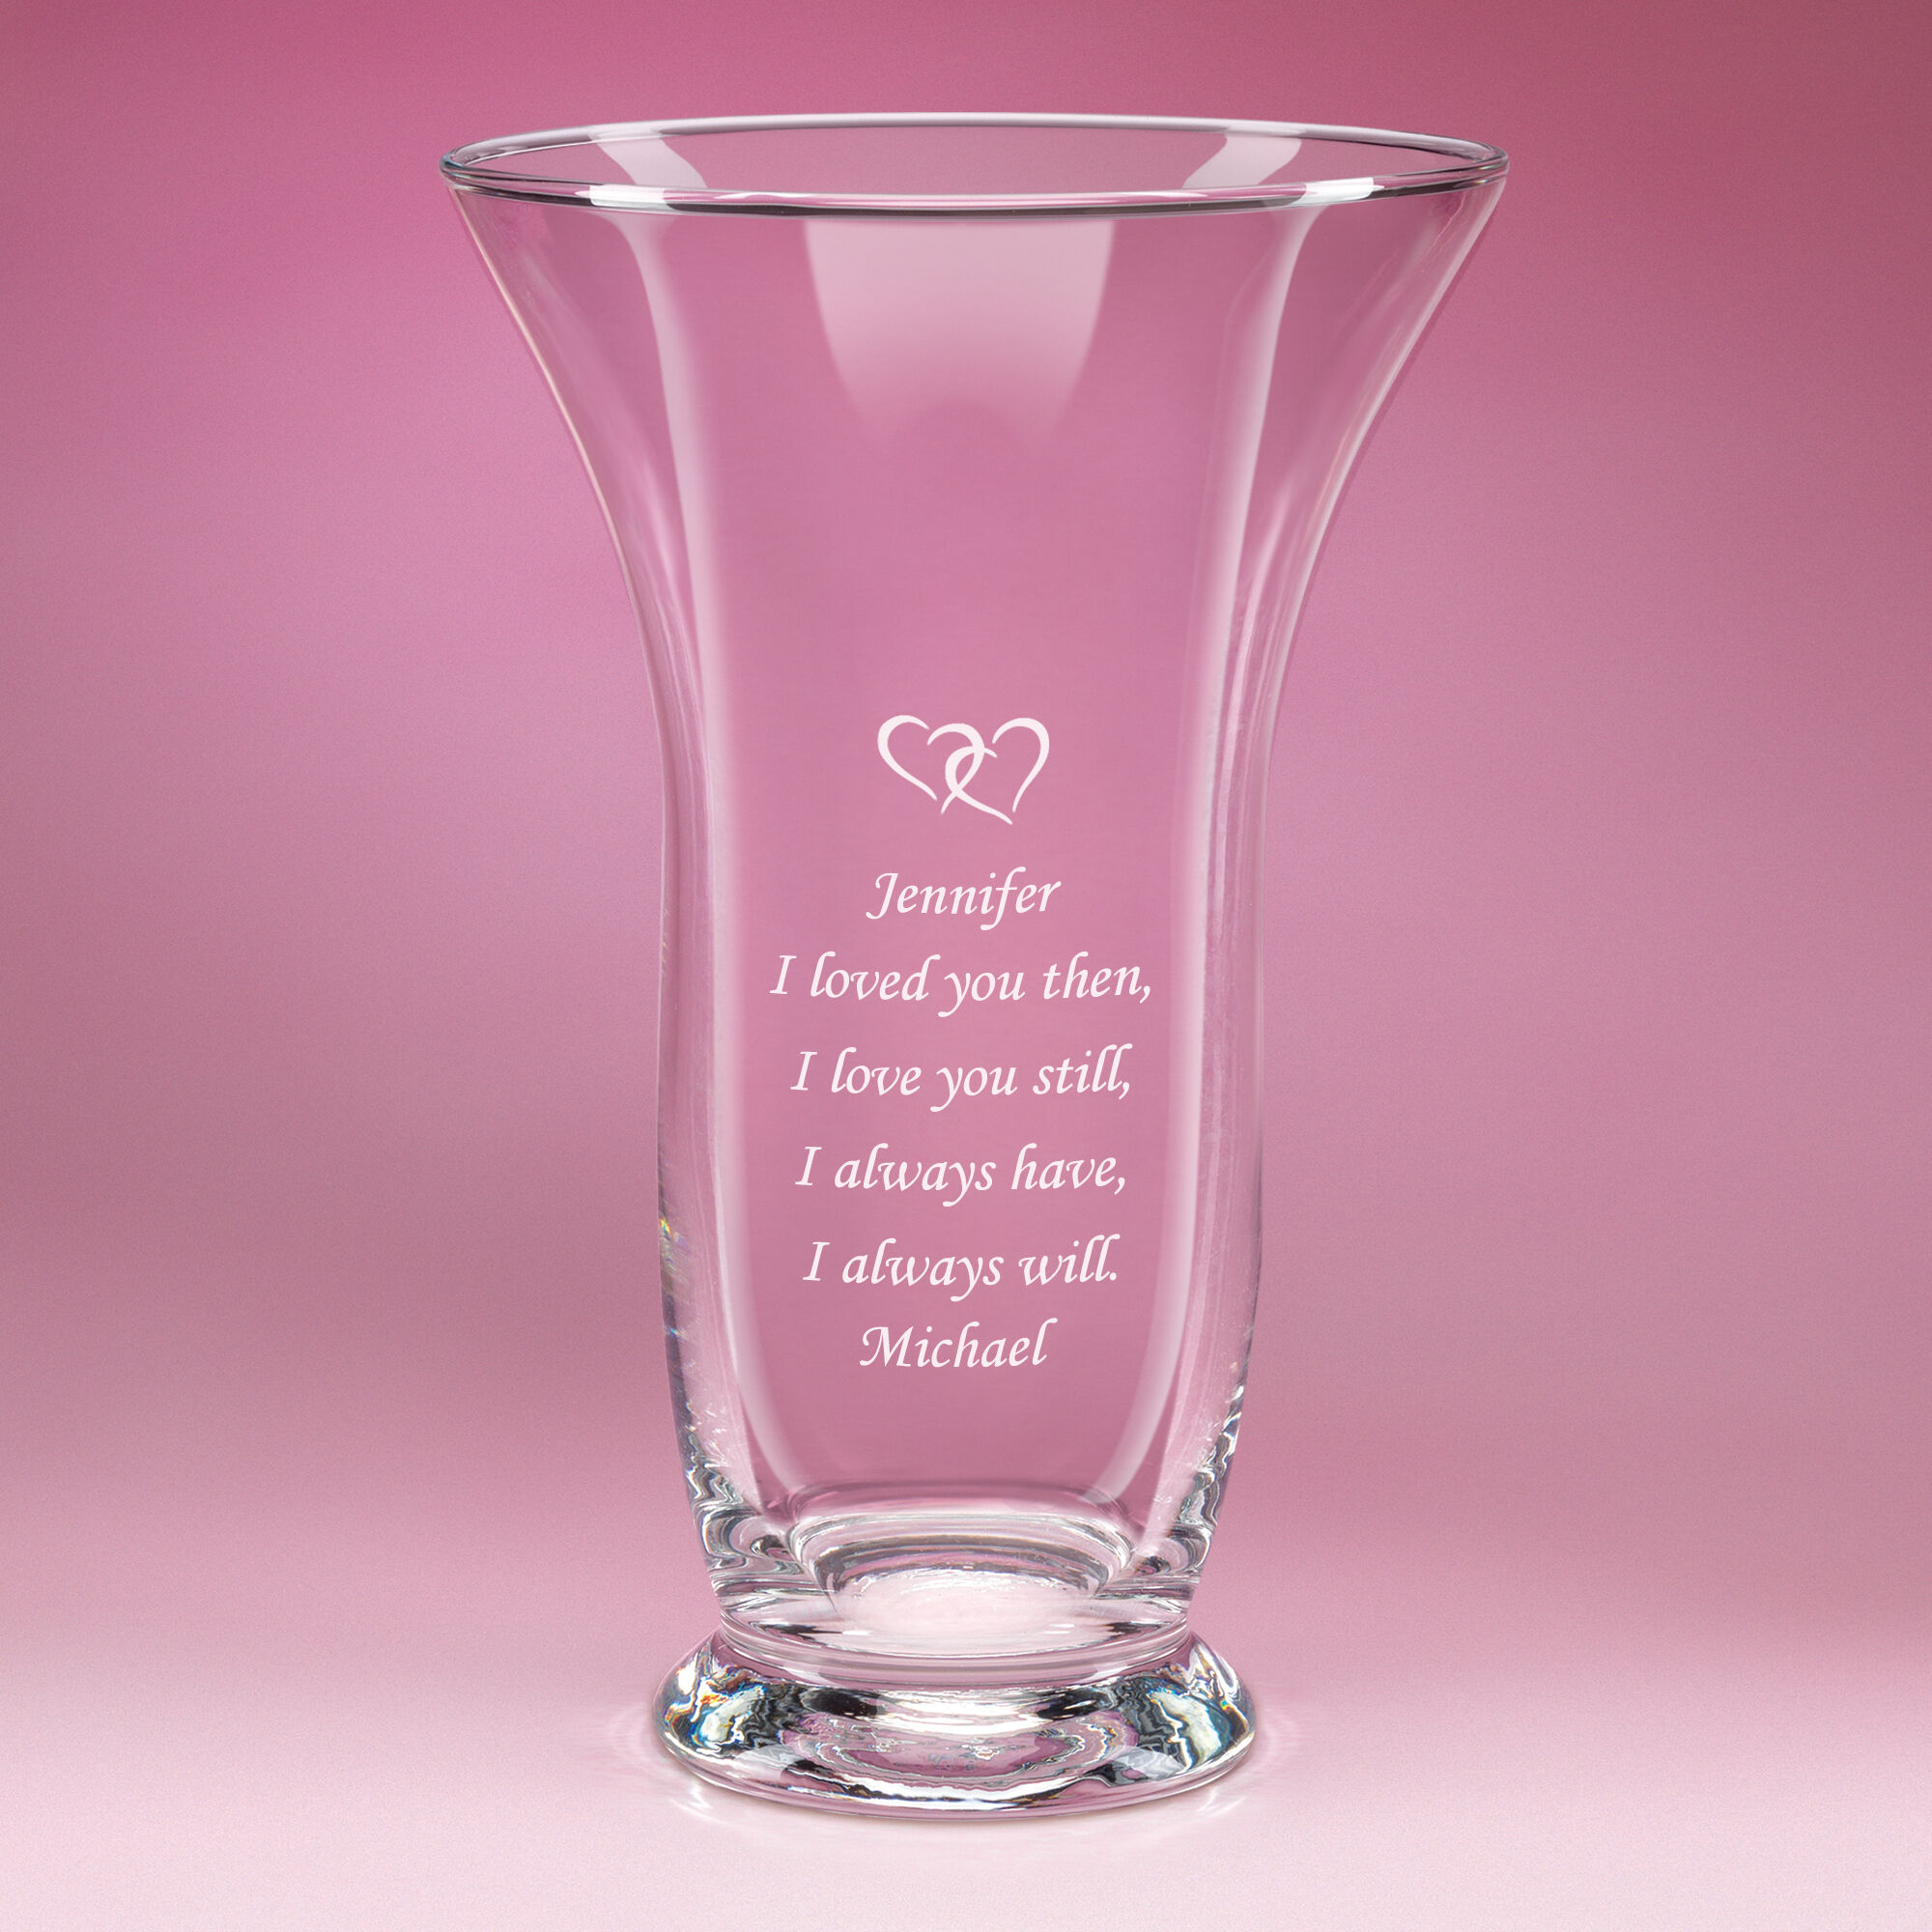 The Personalized I Love You Vase 10157 0026 d pink